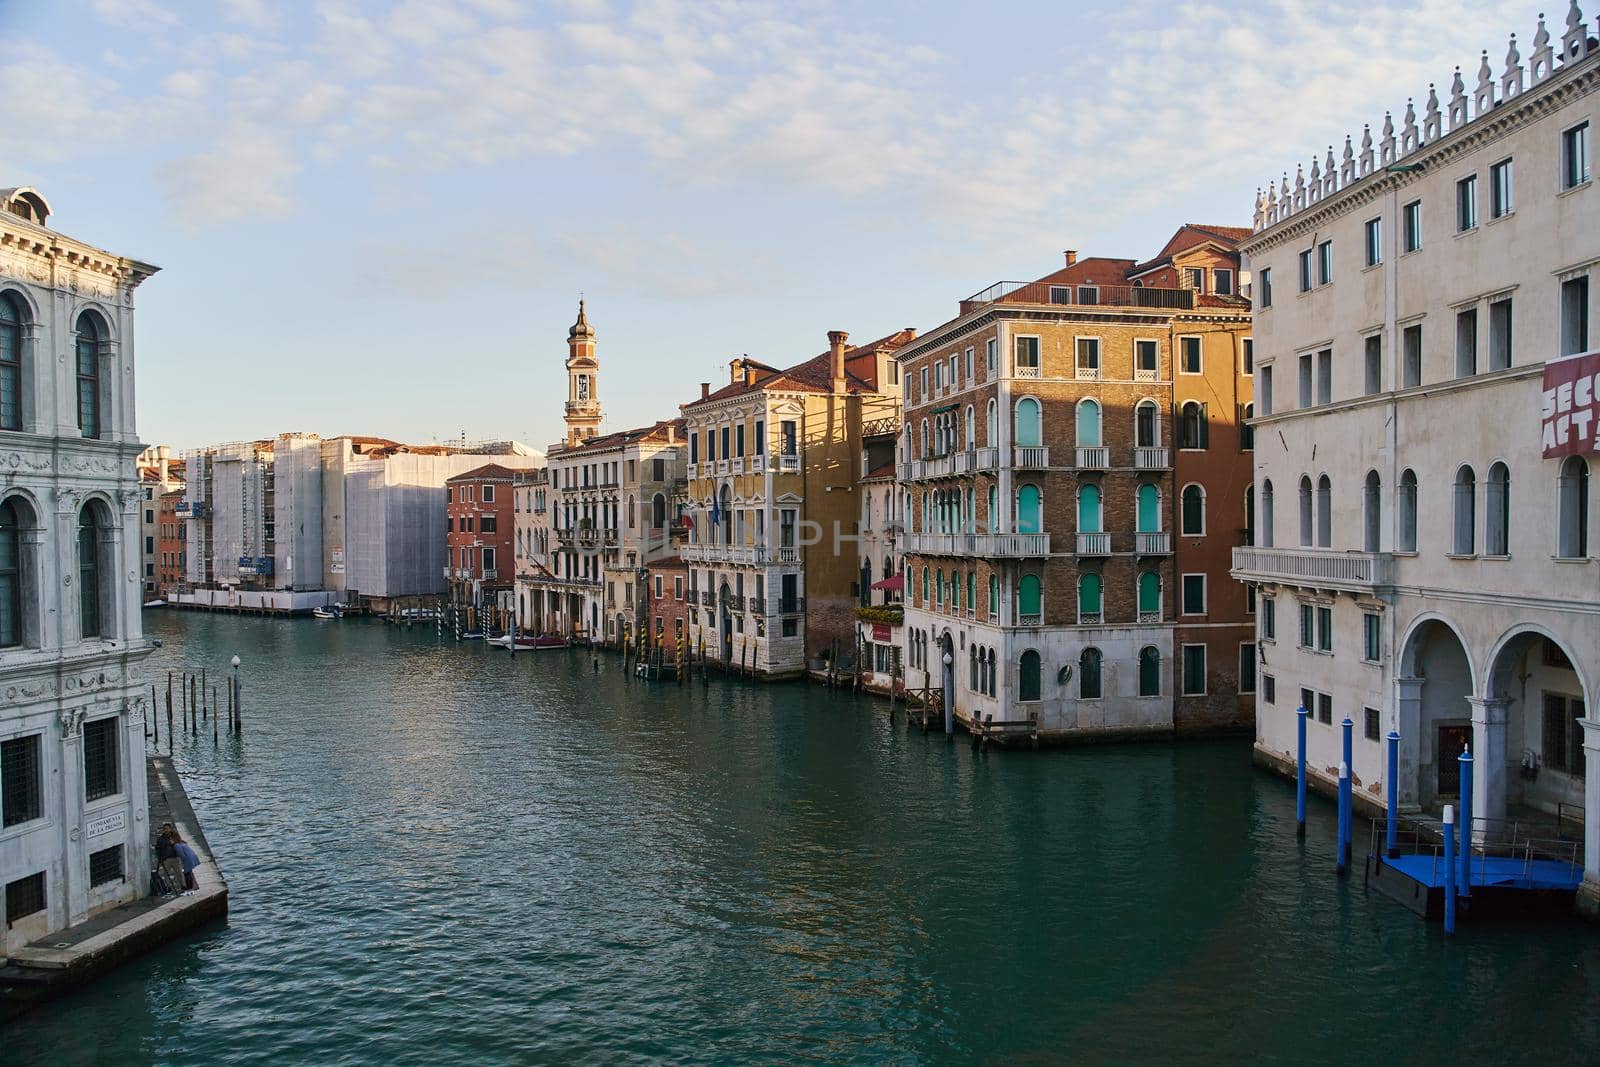 Venice, Italy - 10.12.2021: Beautiful view of famous Grand Canal in Venice, Italy by driver-s